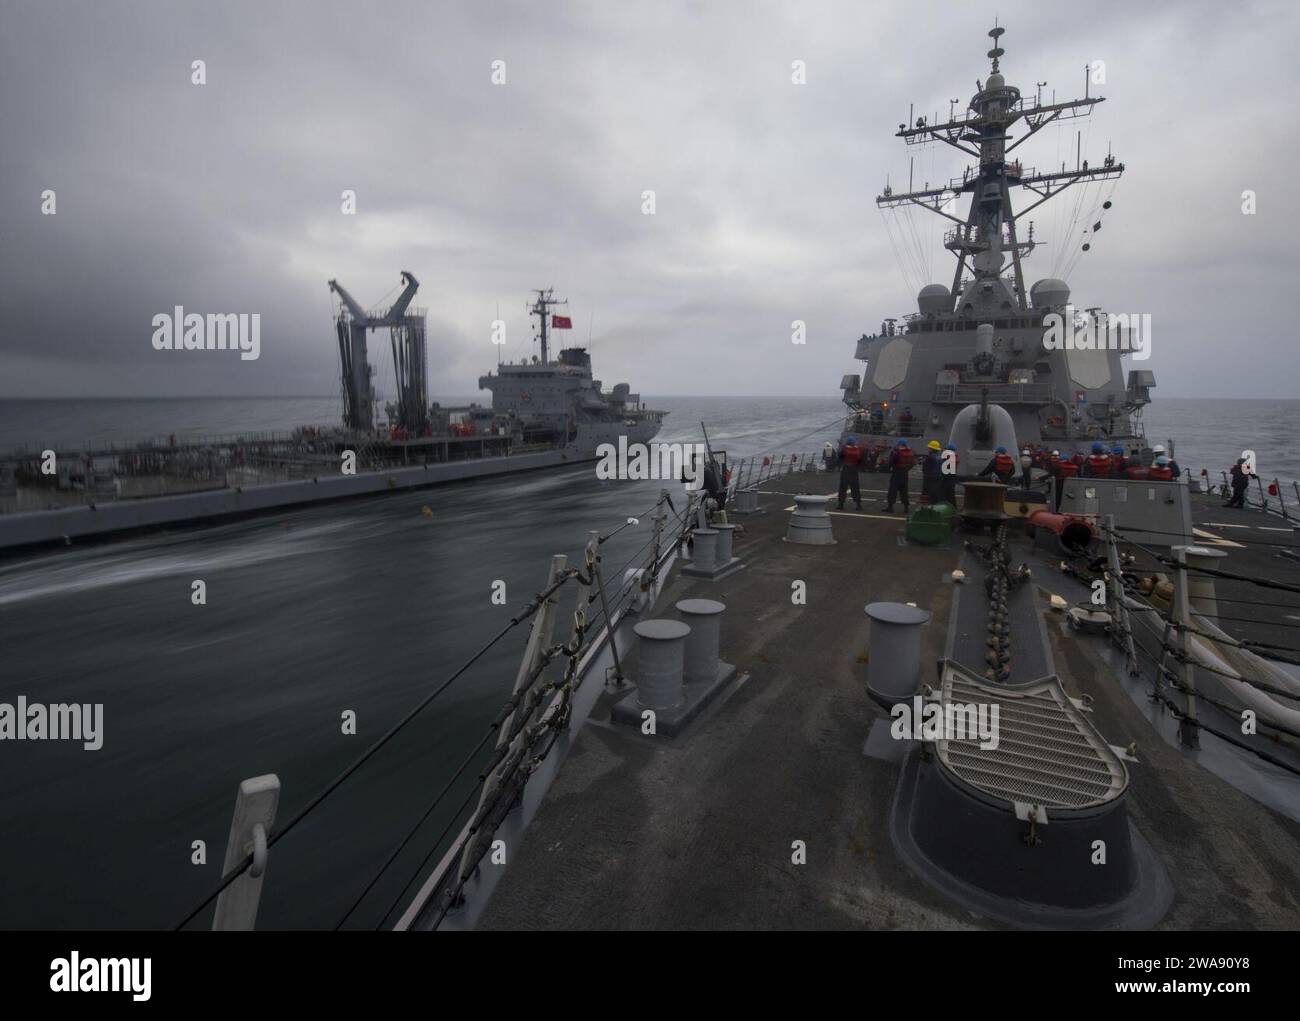 US military forces. 180217RG482-214 BLACK SEA (Feb. 17, 2018) The Arleigh Burke-class guided-missile destroyer USS Ross (DDG 71) steams alongside the Turkish Akar-class replenishment oiler TCG Yuzbasi Kudret Gungor (A 595) during a refueling-at-sea Feb. 17, 2018 in the Black Sea. Ross, forward-deployed to Rota, Spain, is on its sixth patrol in the U.S. 6th Fleet area of operations in support of regional allies and partners and U.S. national security interests in Europe. (U.S. Navy photo by Mass Communication Specialist 1st Class Kyle Steckler/Released) Stock Photo